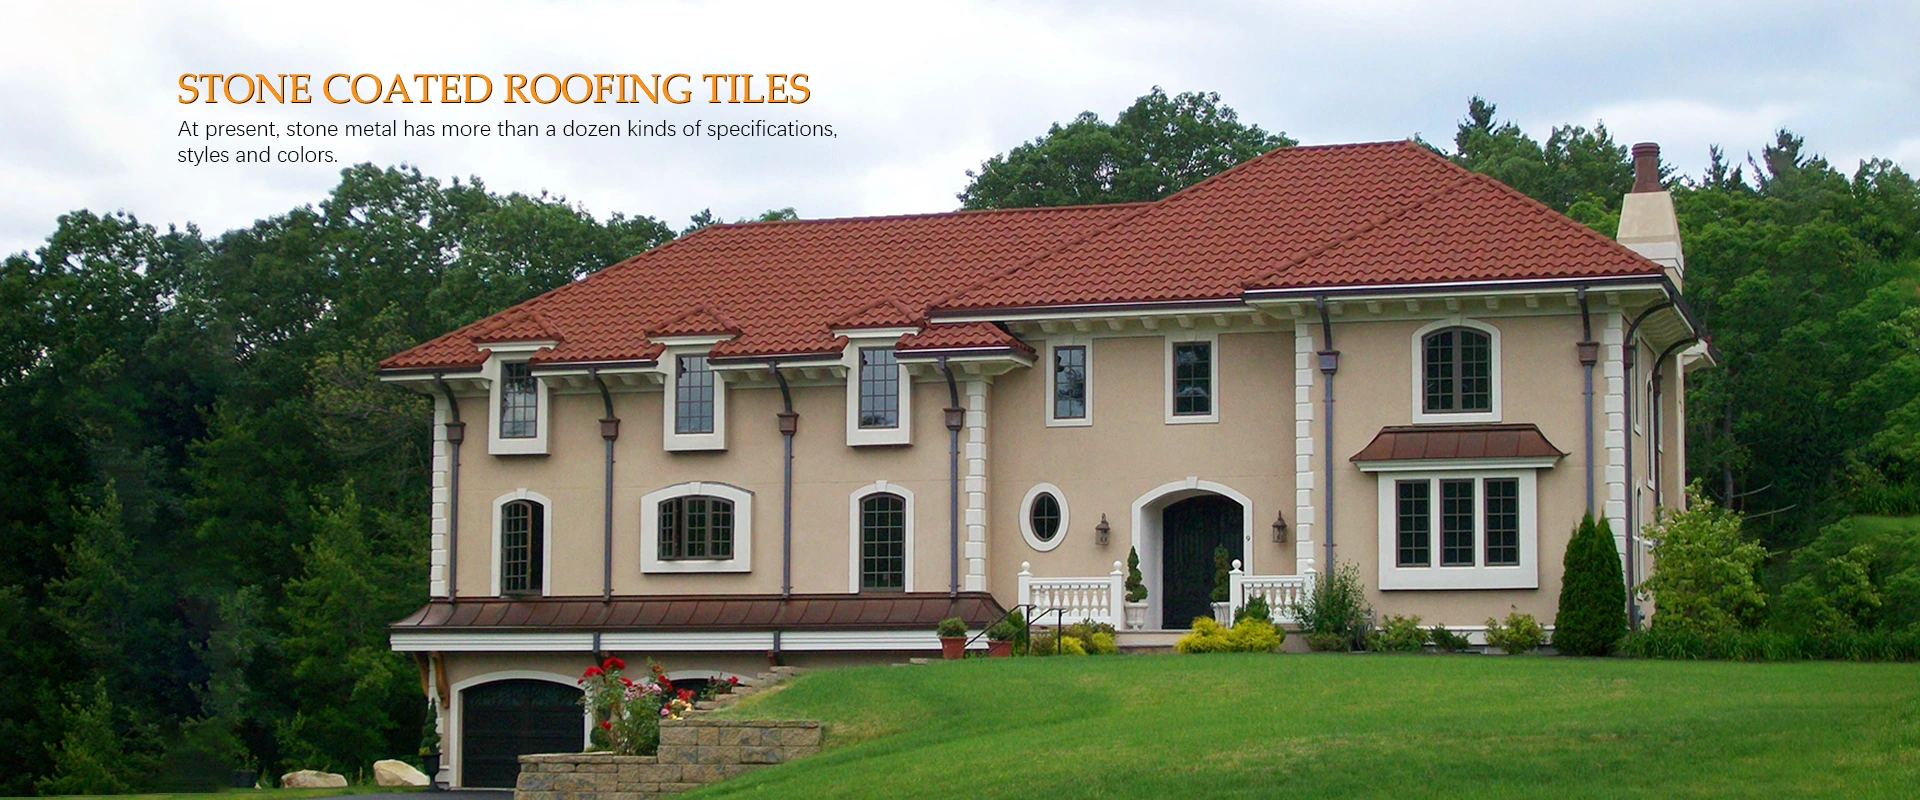 China Stone Coated Roofing Tile Manufacturers